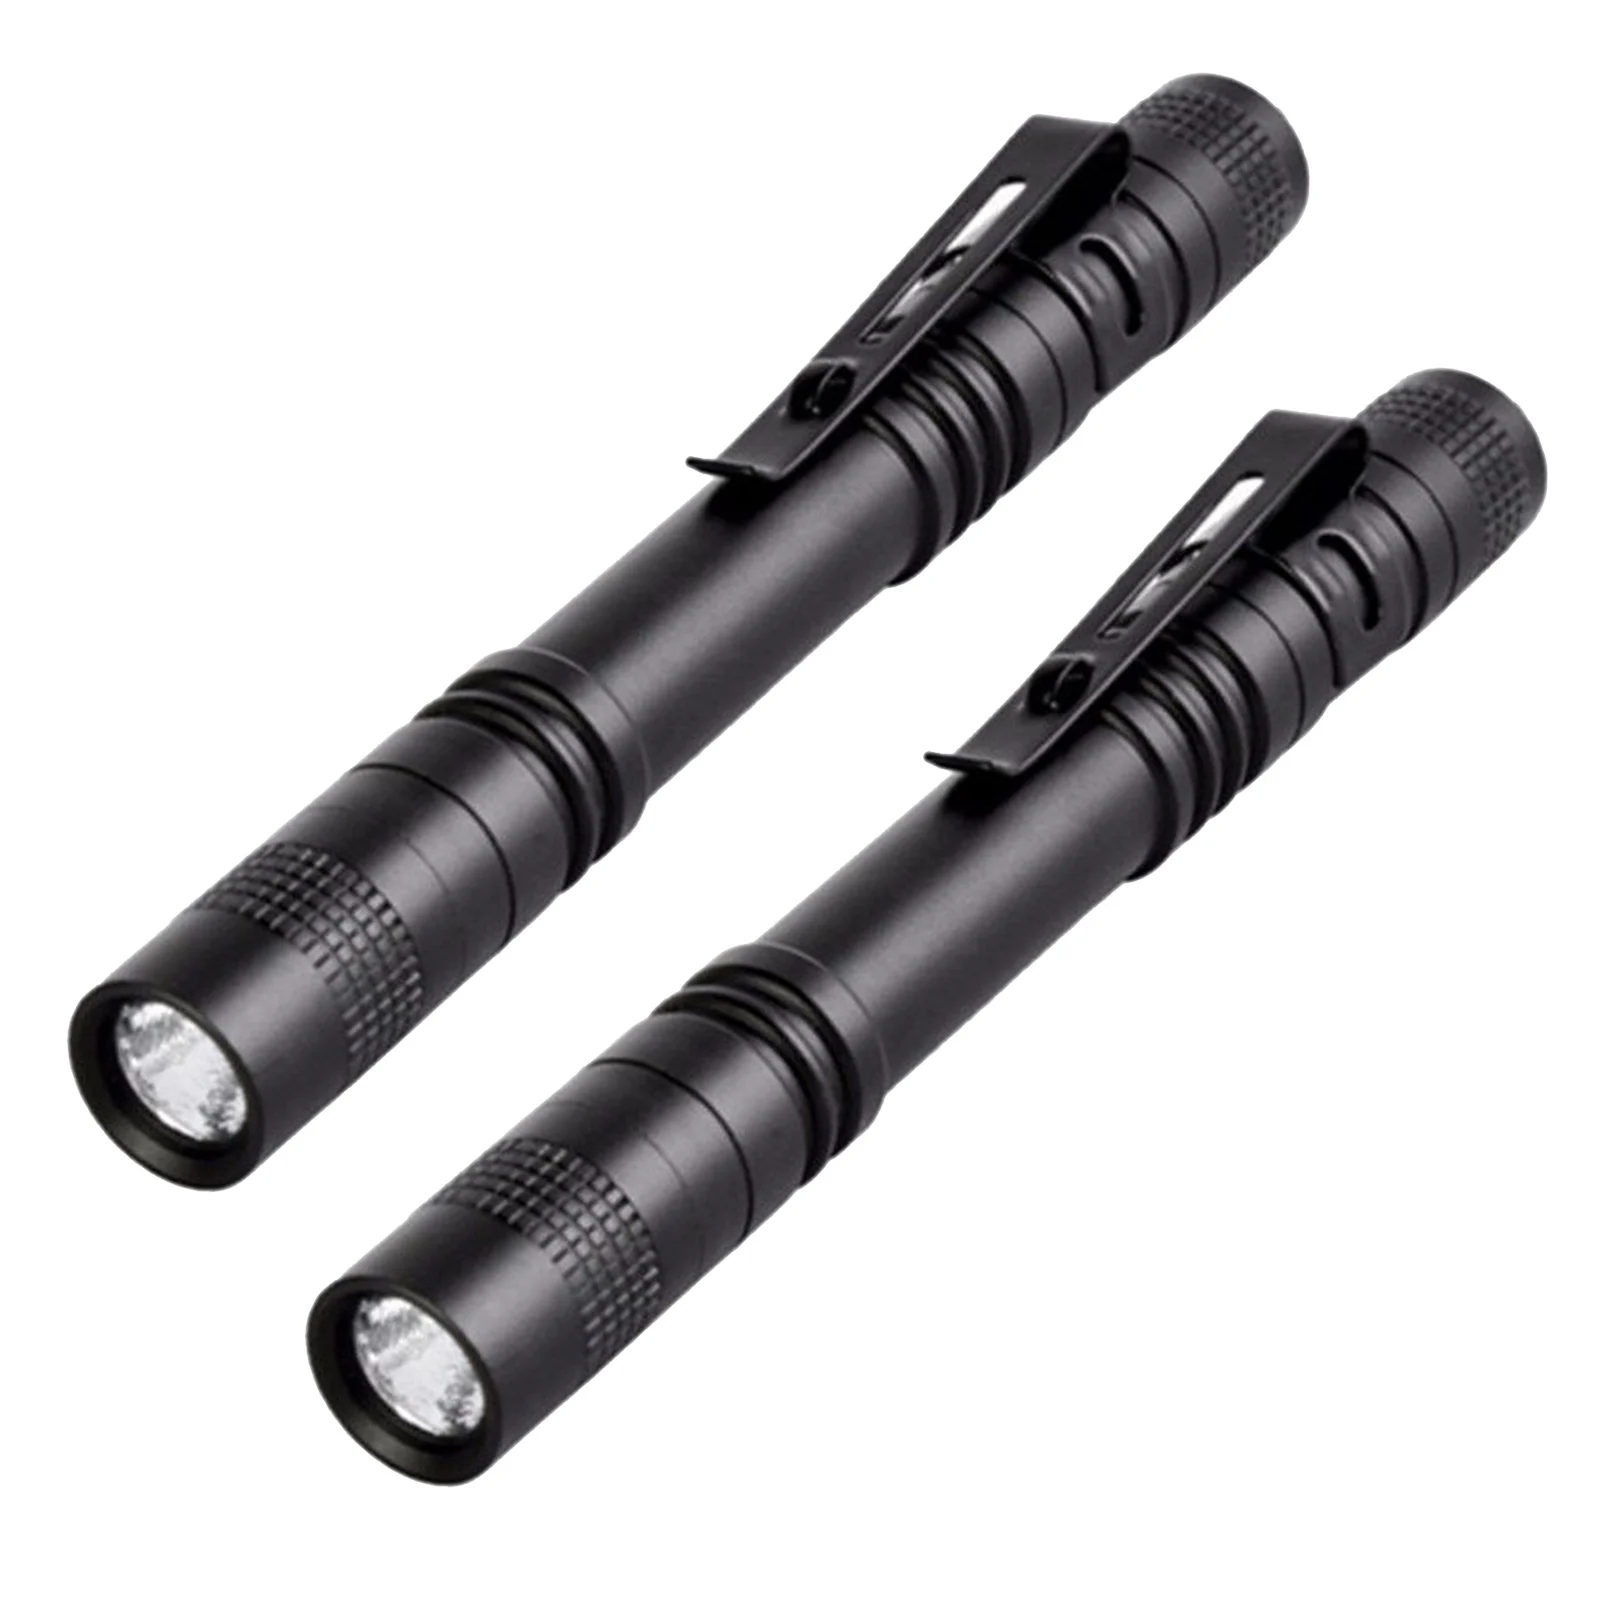 

2pcs Dry Stain Pen Shape UV Flashlight With Clip Hotel Inspection Waterproof LED Battery Powered Professional Handheld Practical